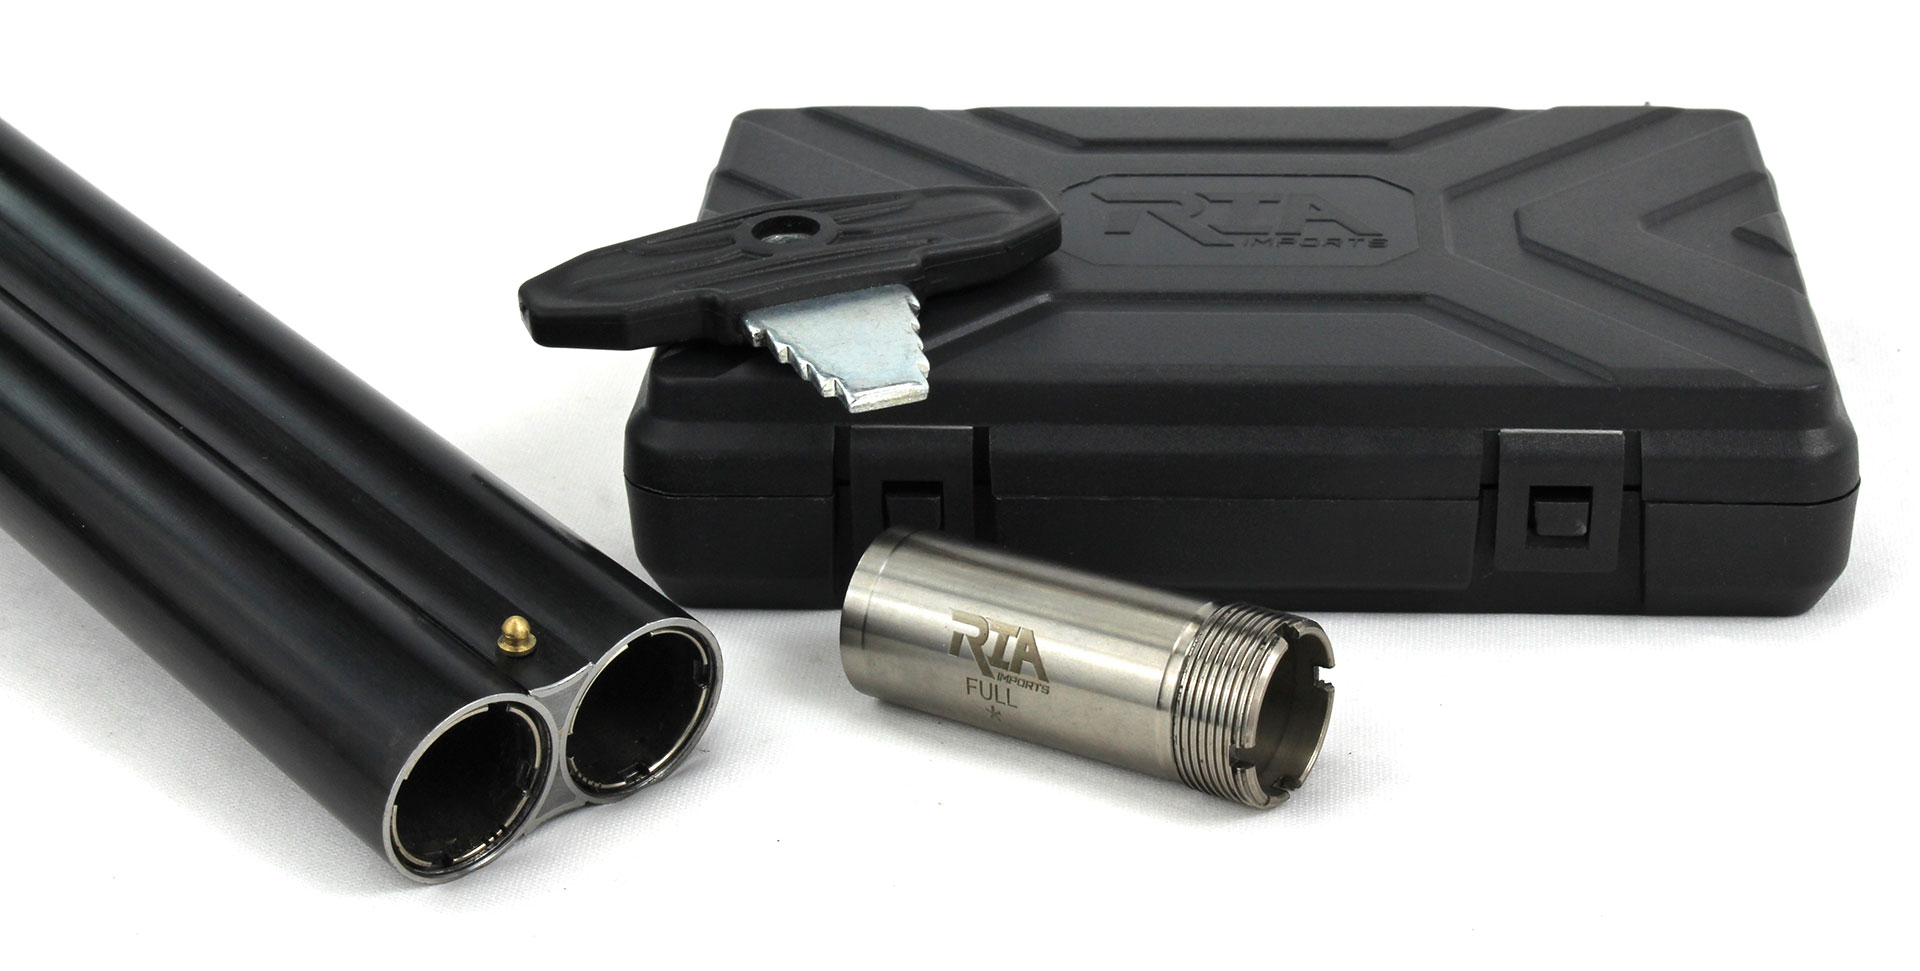 Rock Island Armory Side-By-Side 12 gauge shotgun double barrel muzzle with two adjustable chokes in a black case.